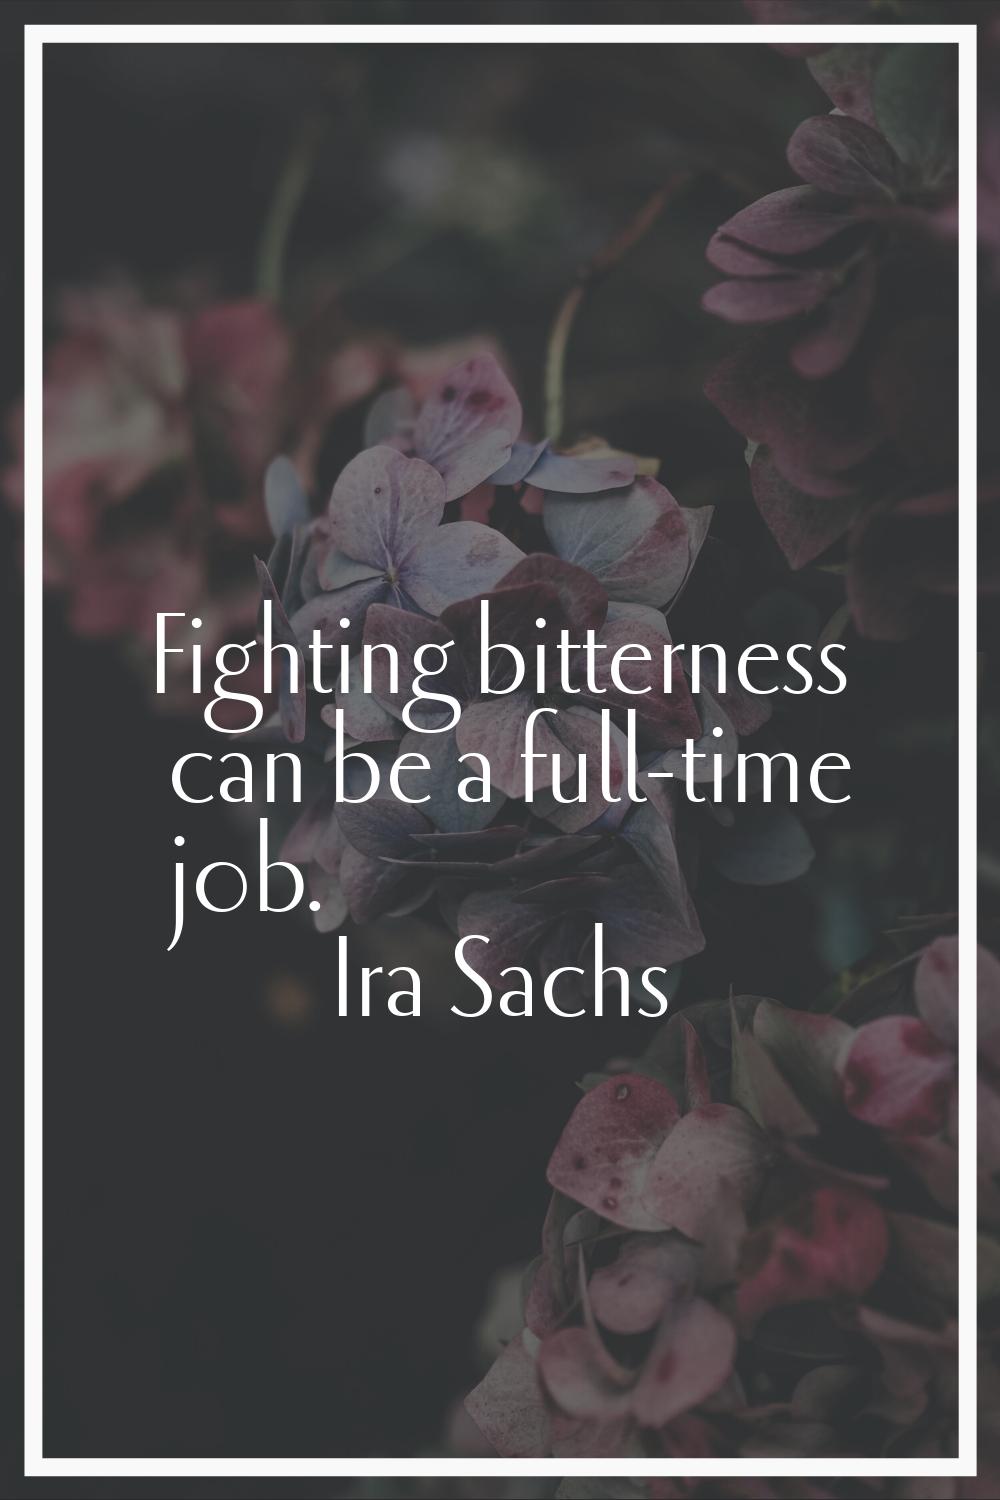 Fighting bitterness can be a full-time job.